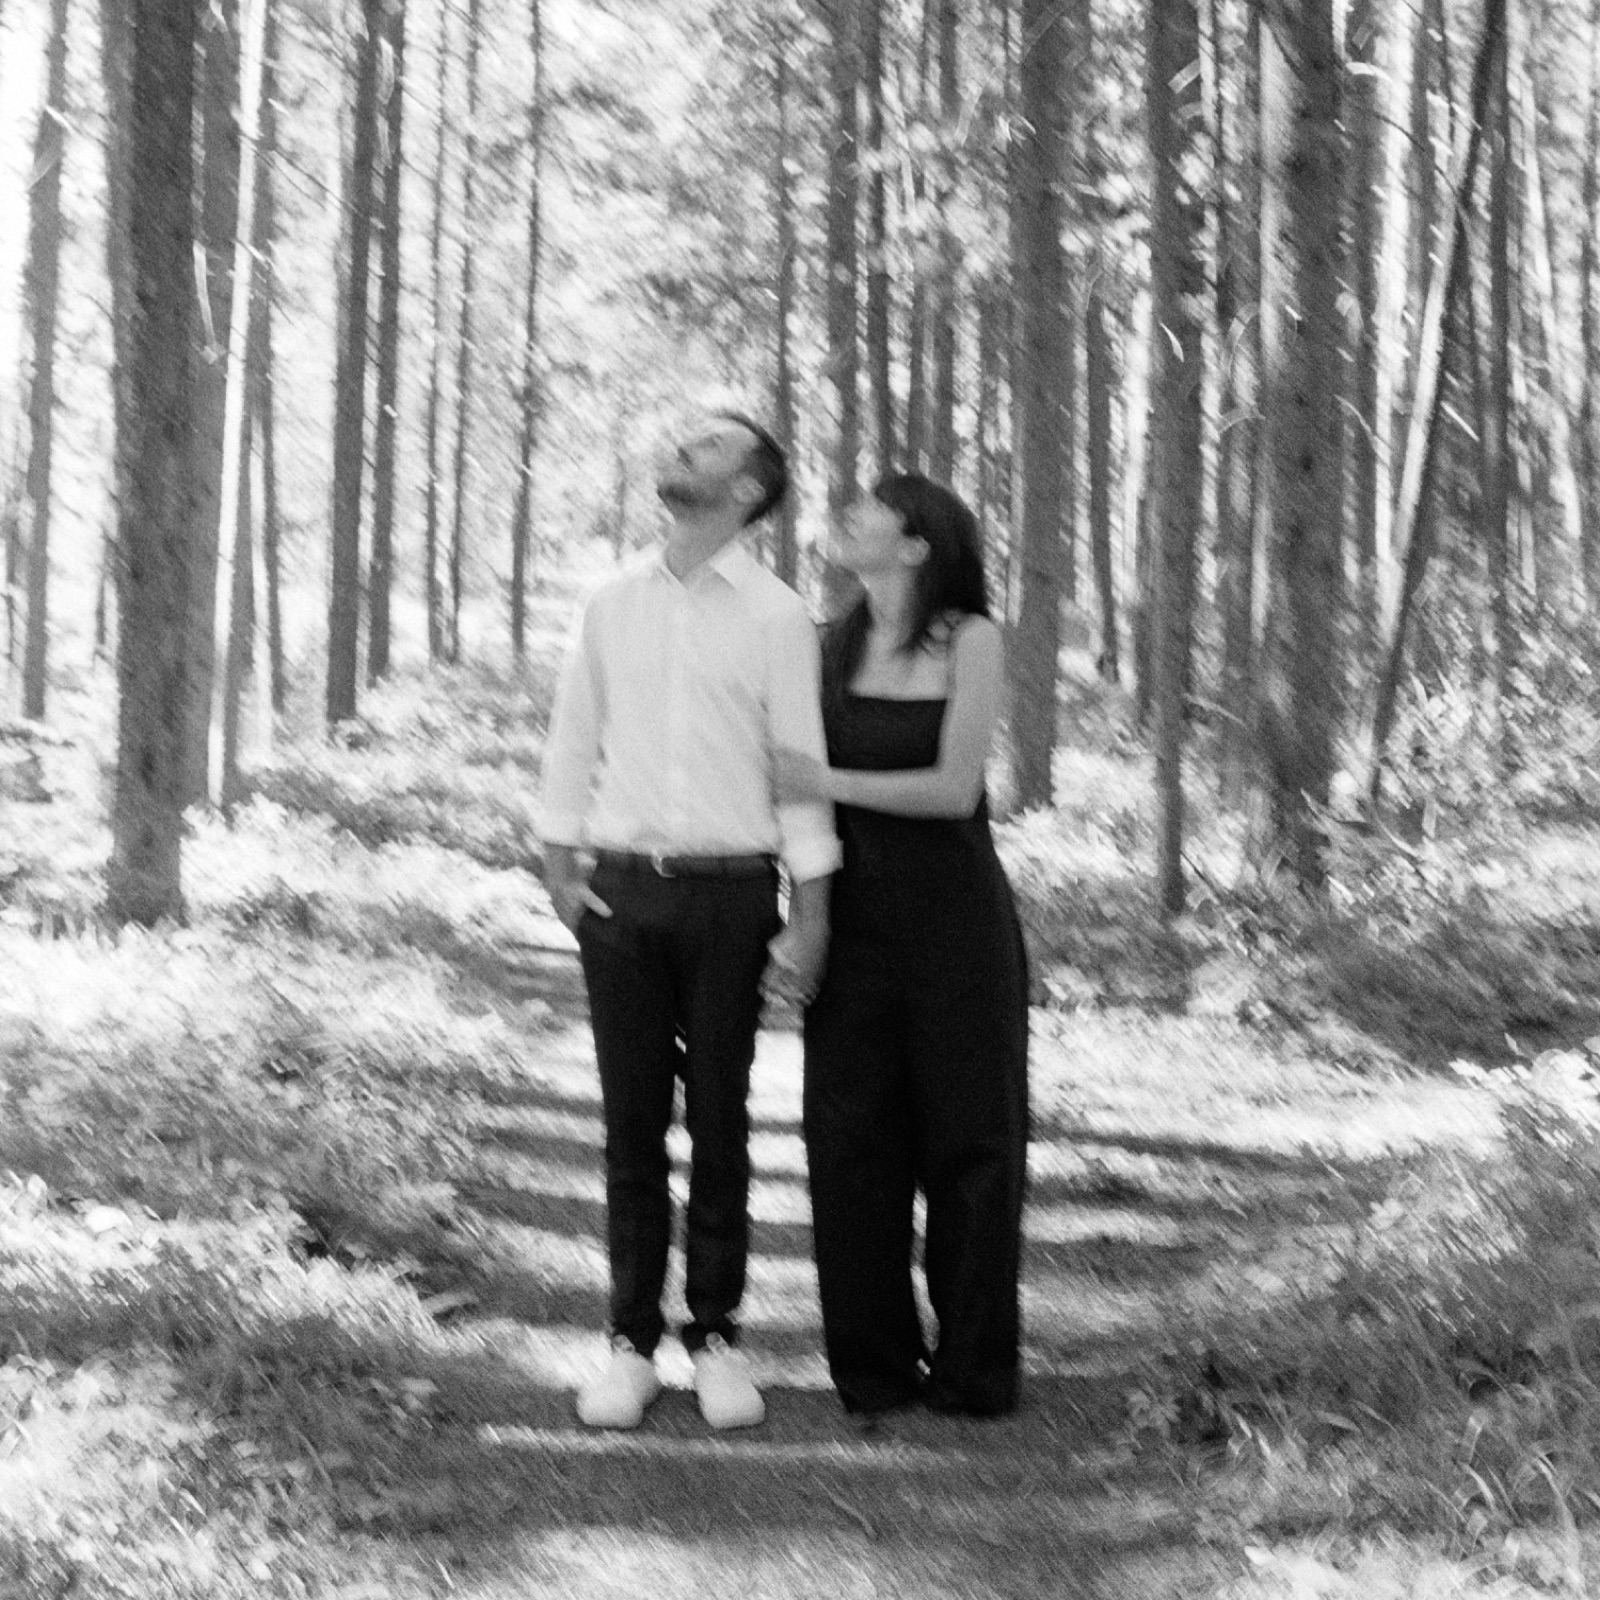 Lake Louise elopement couple embracing in a forest behind the Post Hotel as shot on black and white Ilford film